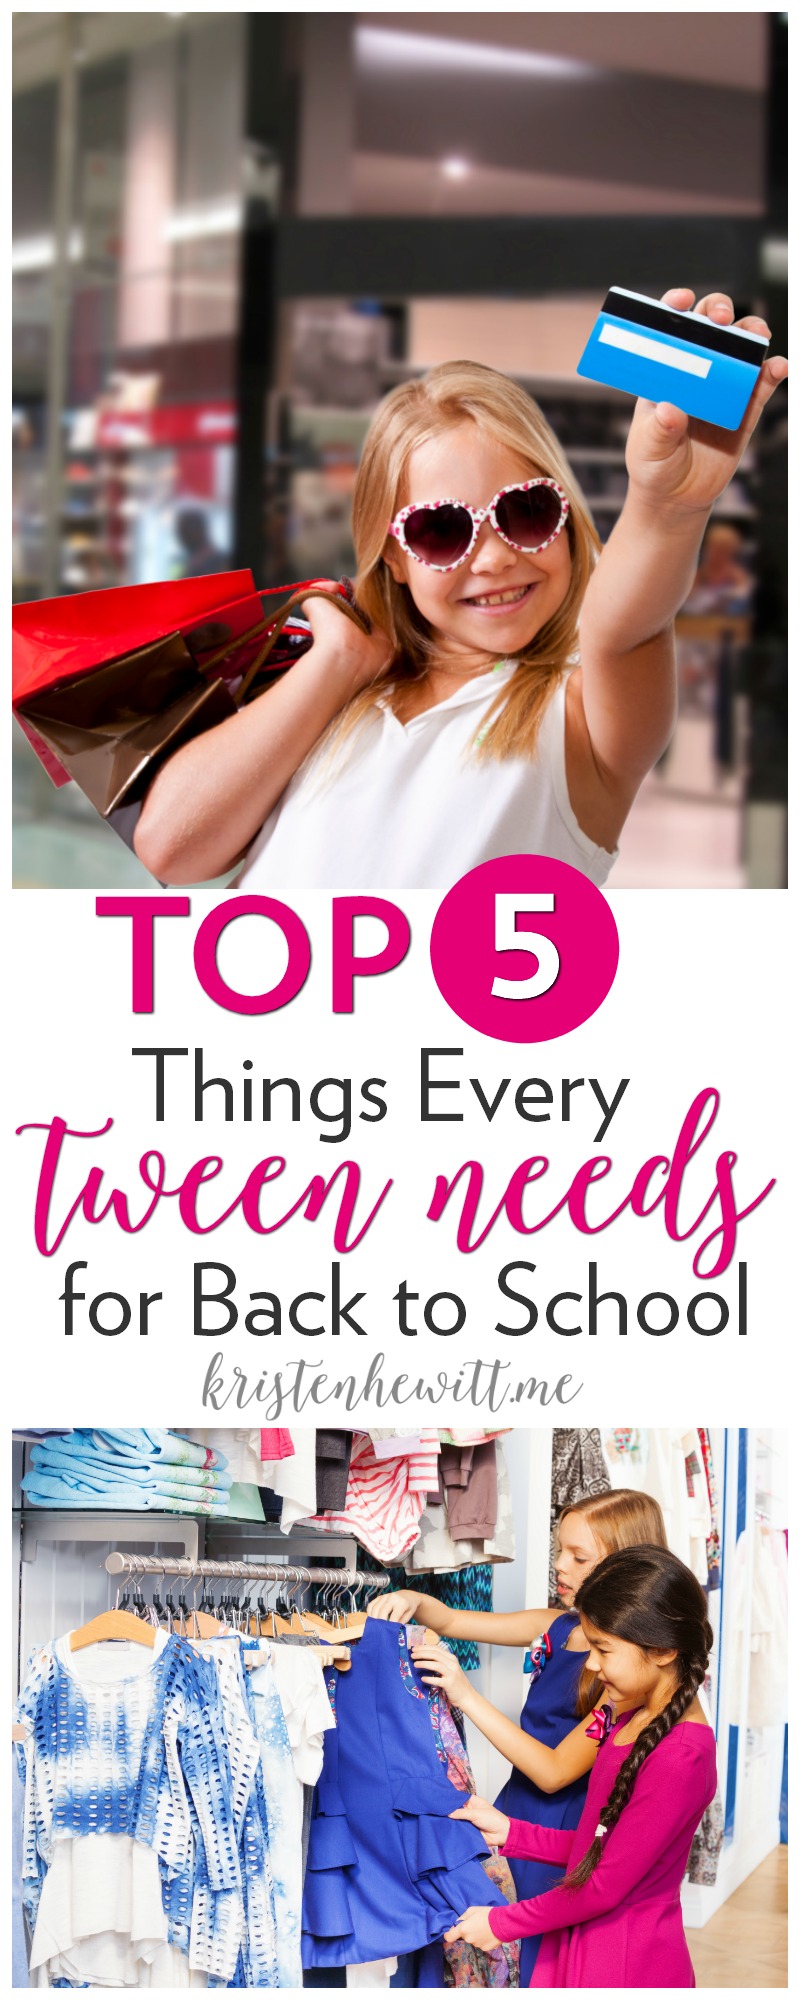 It's almost time for school and shopping for tweens can be tough! So here's a guide to back to school shopping for tweens written by a tween. Good luck!